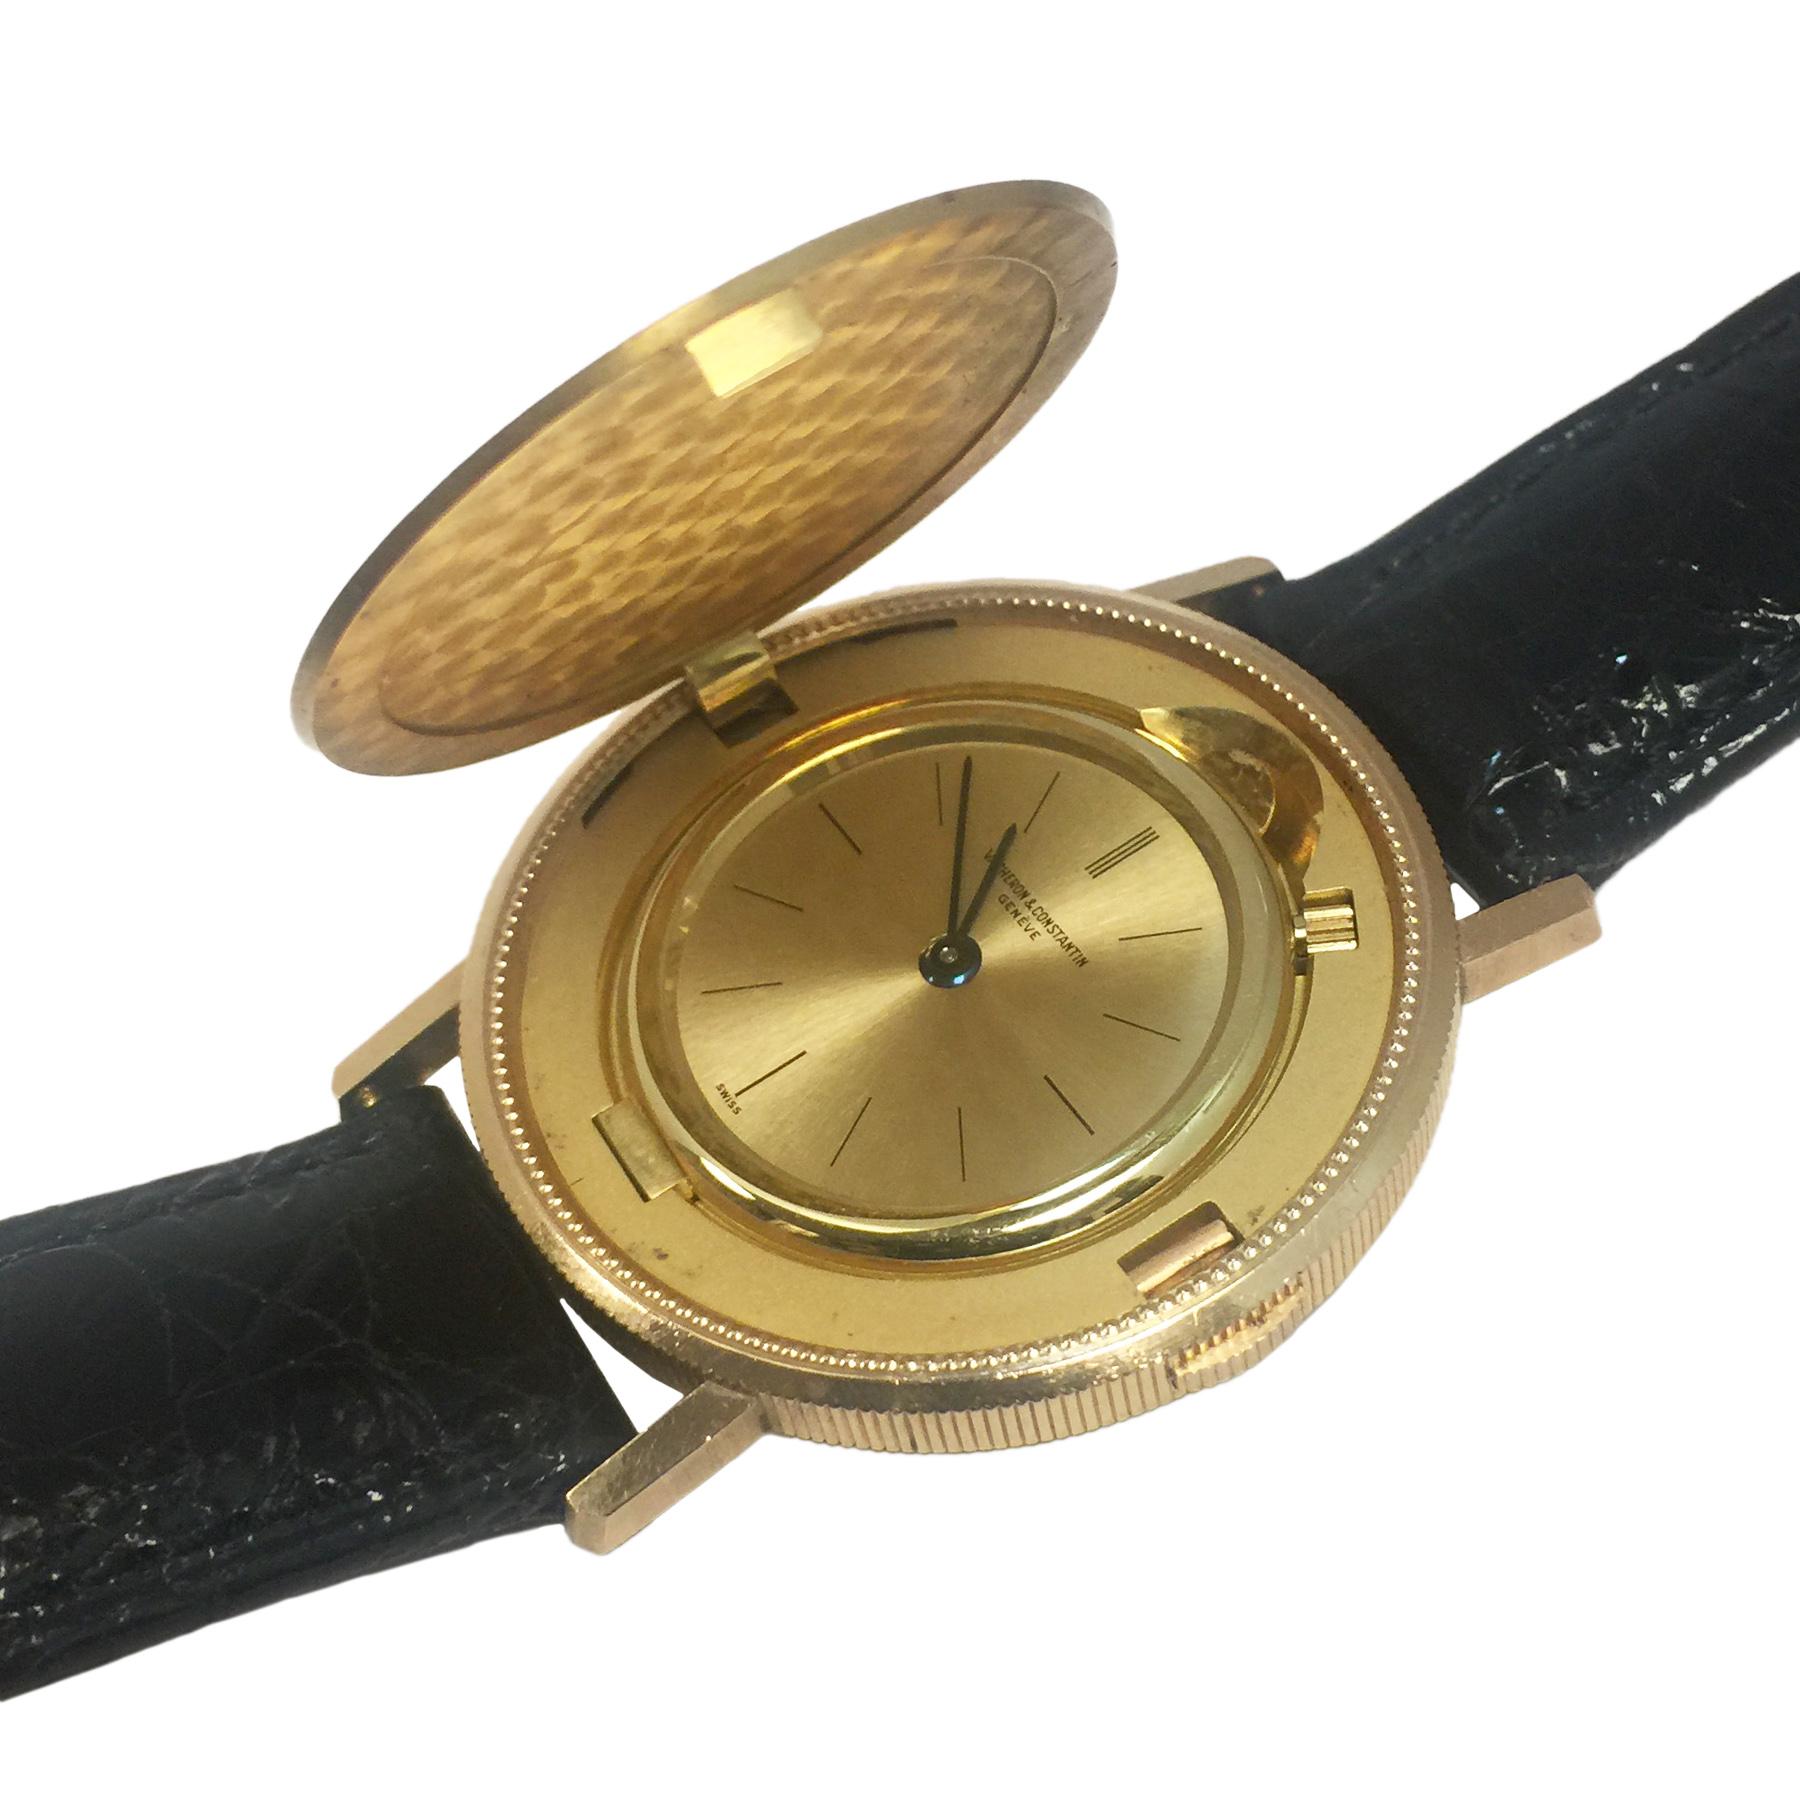 From the Estate of Comedian Jerry Lewis is this circa 1970 Vacheron Constantin $20 U. S. Gold Coin wrist watch. 34 MM 18K Yellow Gold case with a coin edge and a partial concealed button to operate the flip open cover. 17 jewel mechanical, manual